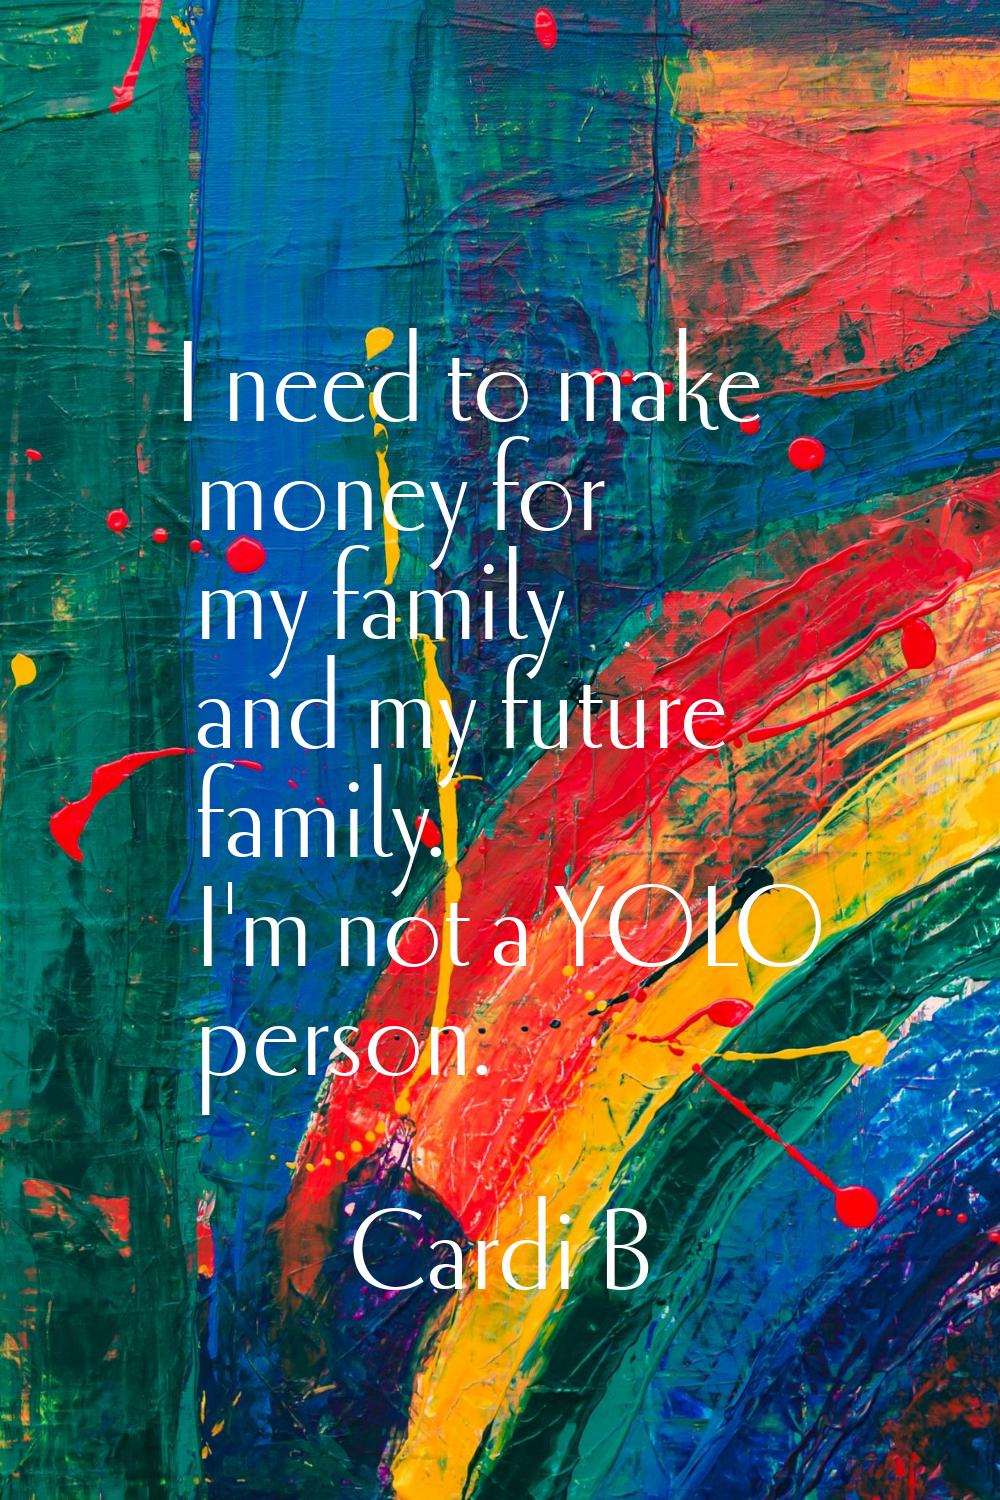 I need to make money for my family and my future family. I'm not a YOLO person.